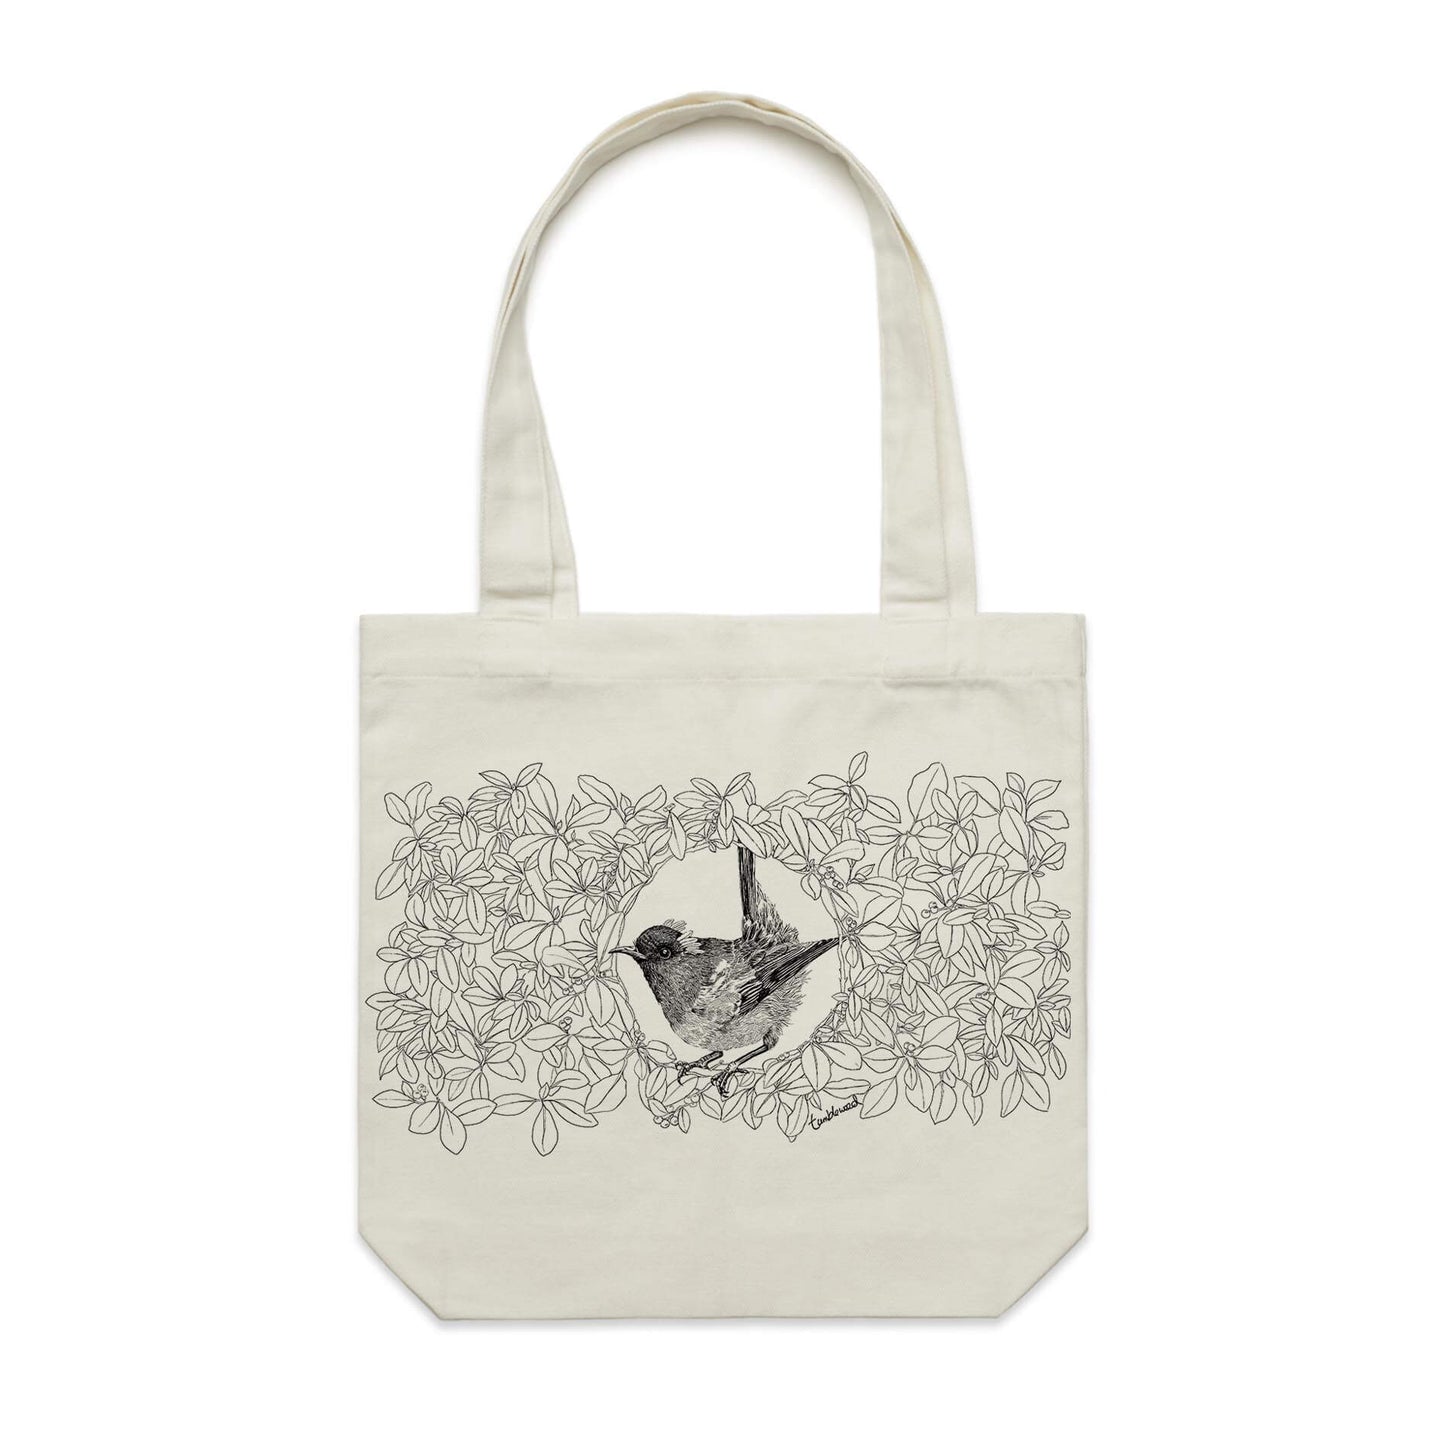 Cotton canvas tote bag with a screen printed Hihi/Stitchbird design.